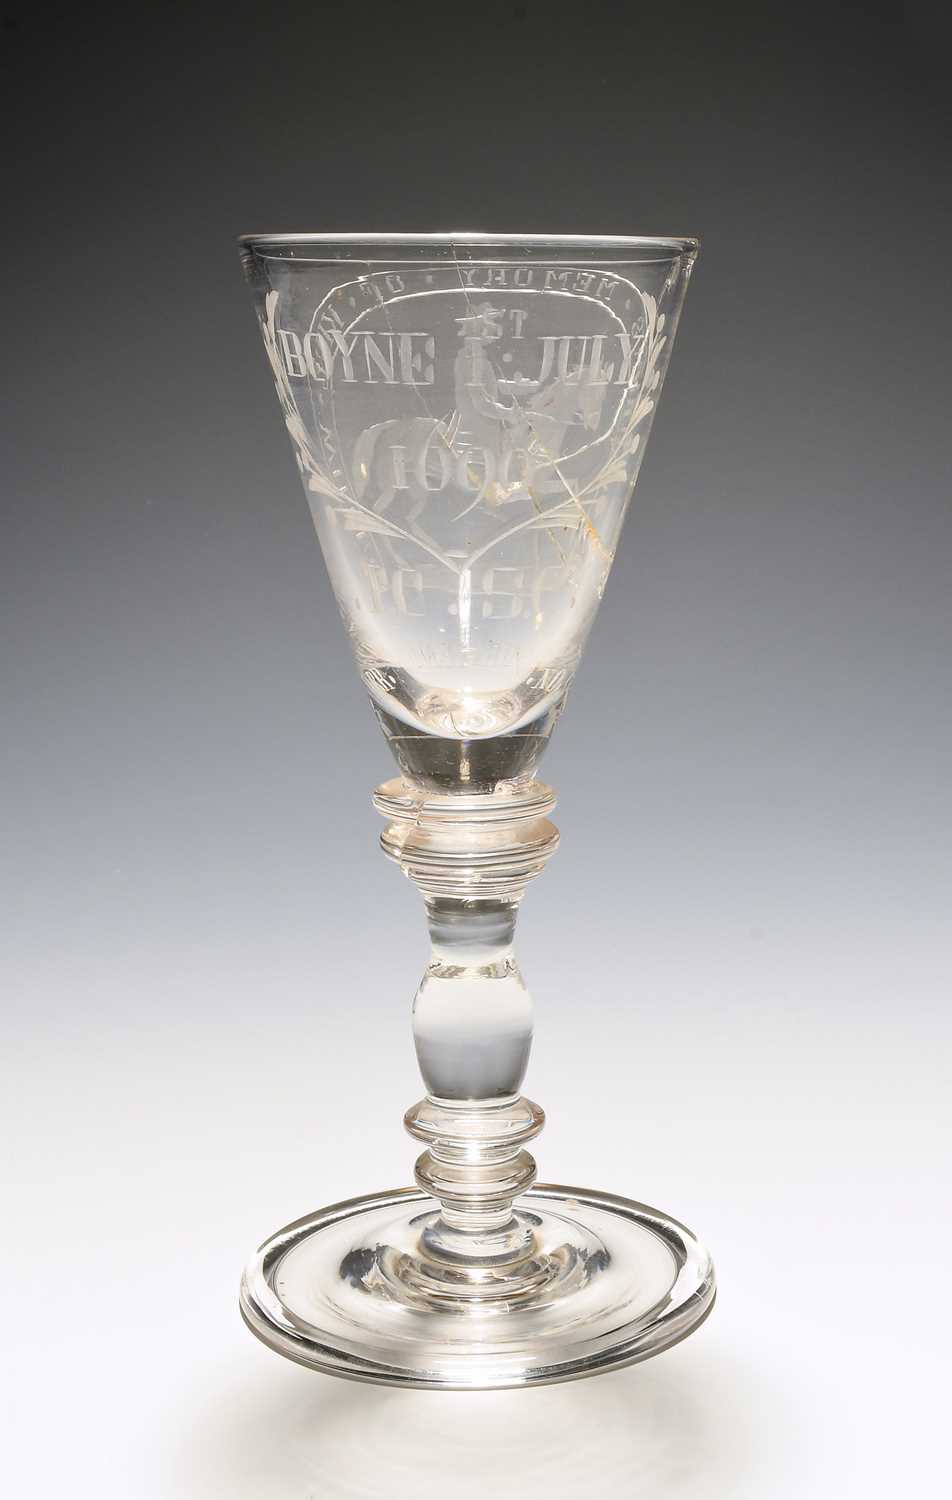 A Williamite wine glass, probably early 18th century, the flared bowl engraved with an equestrian